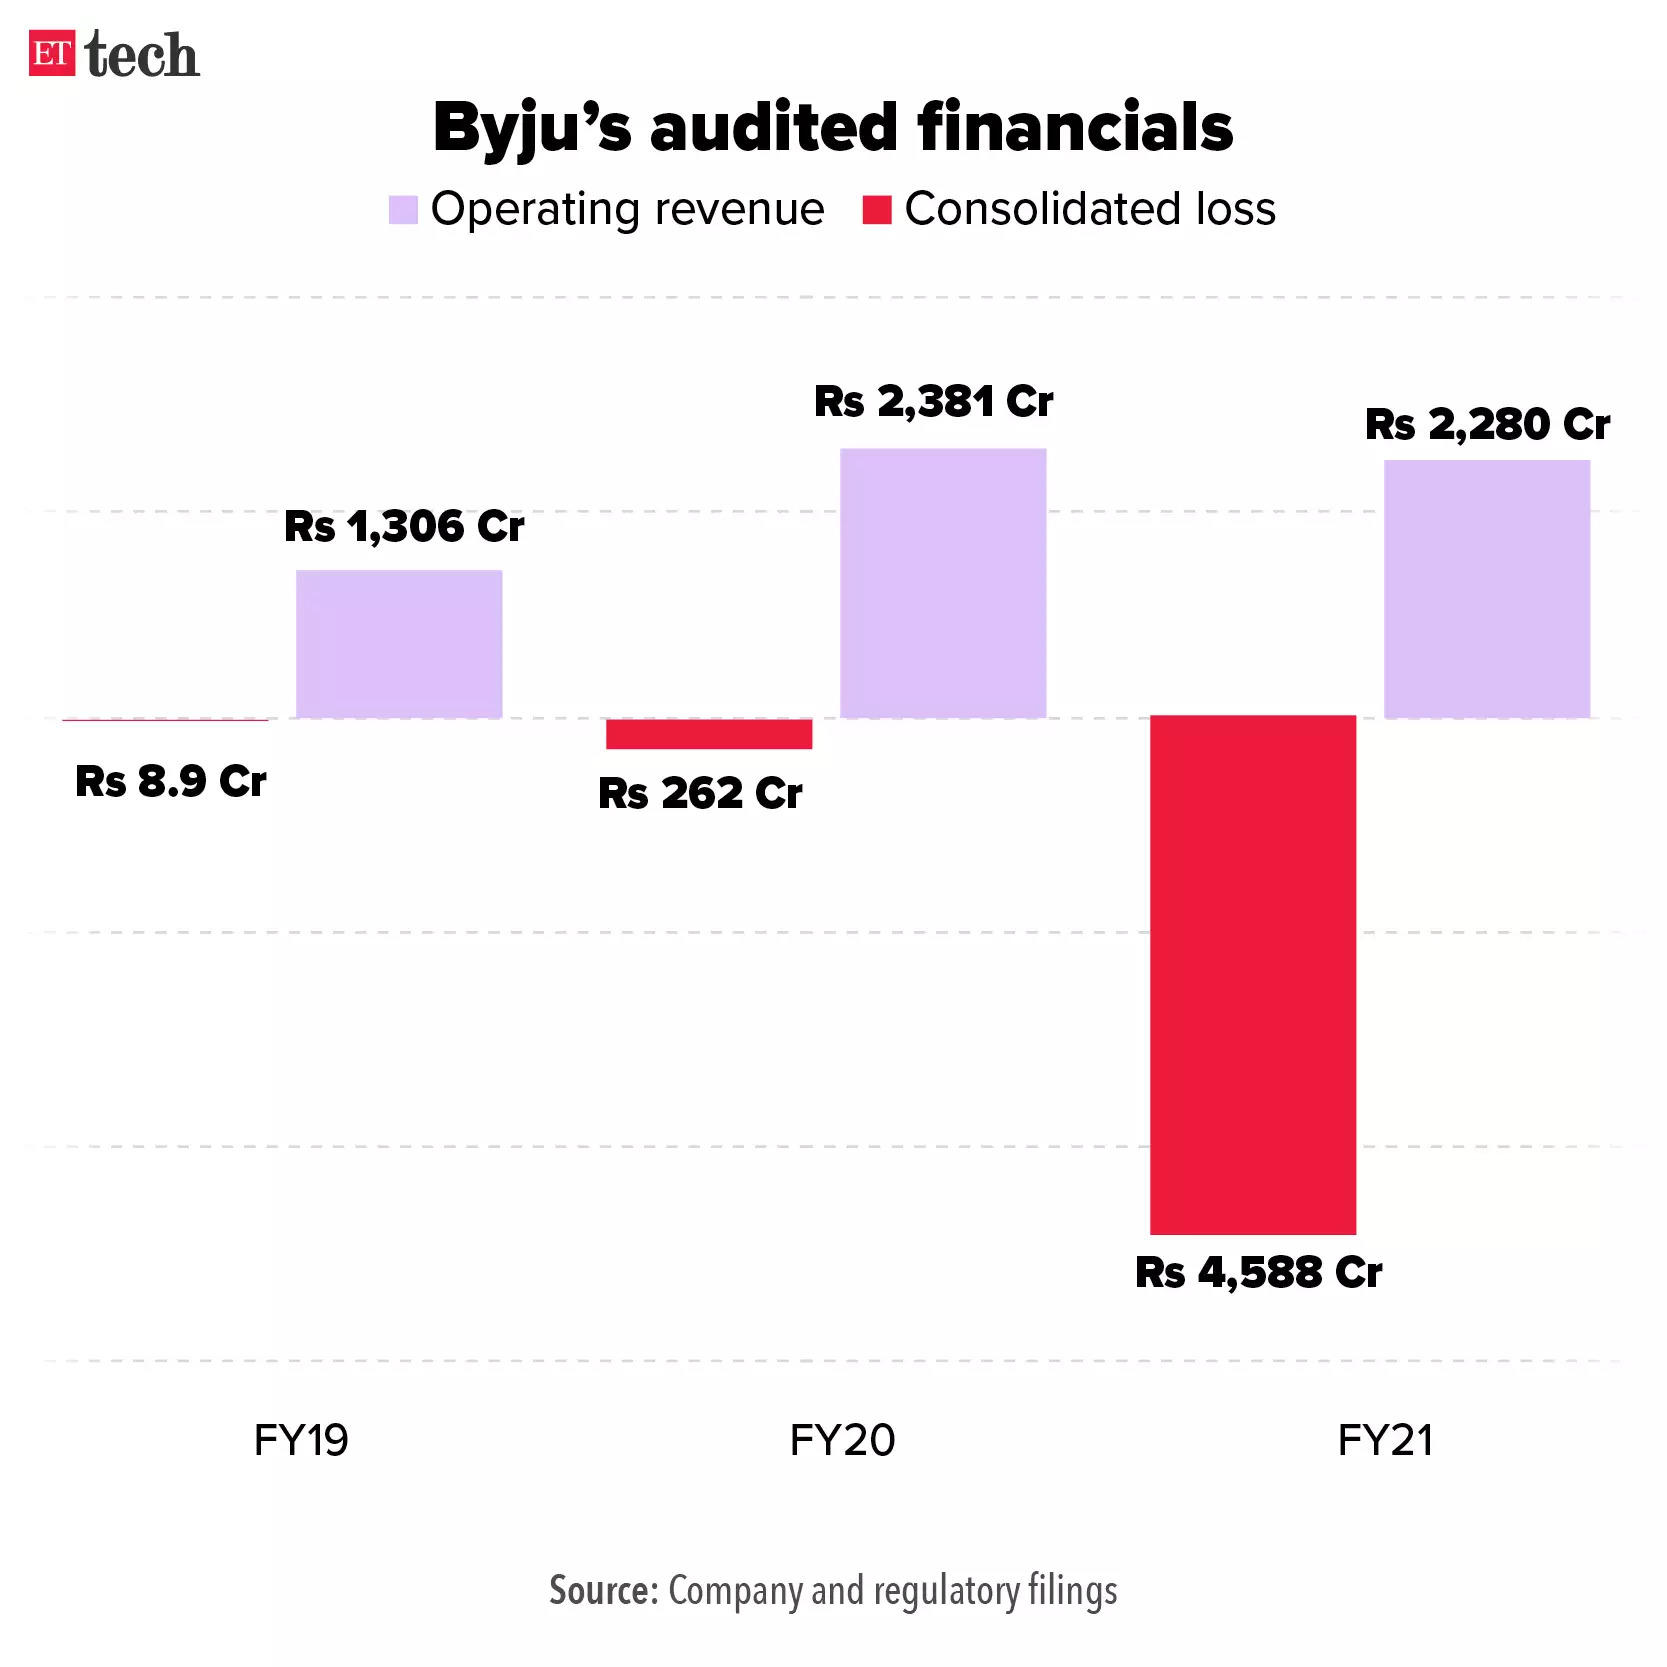 byjus audited financials.